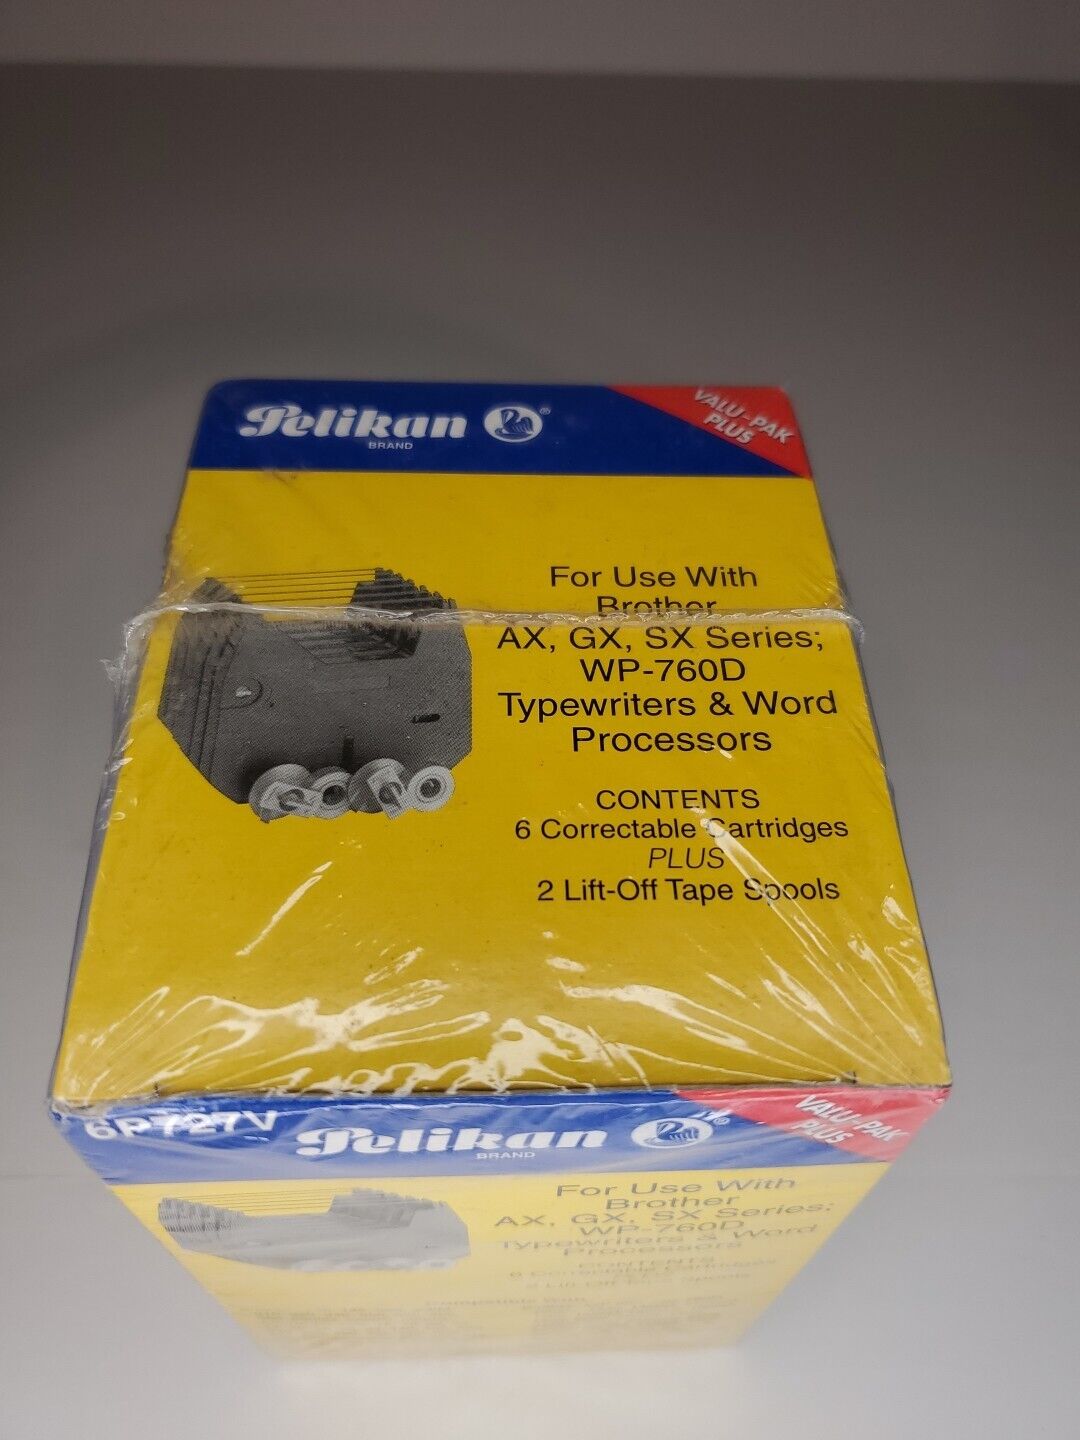 Pelikan Typewriter 6 Cartridges 2 Spools for Brother AX GX SX Wp-760d